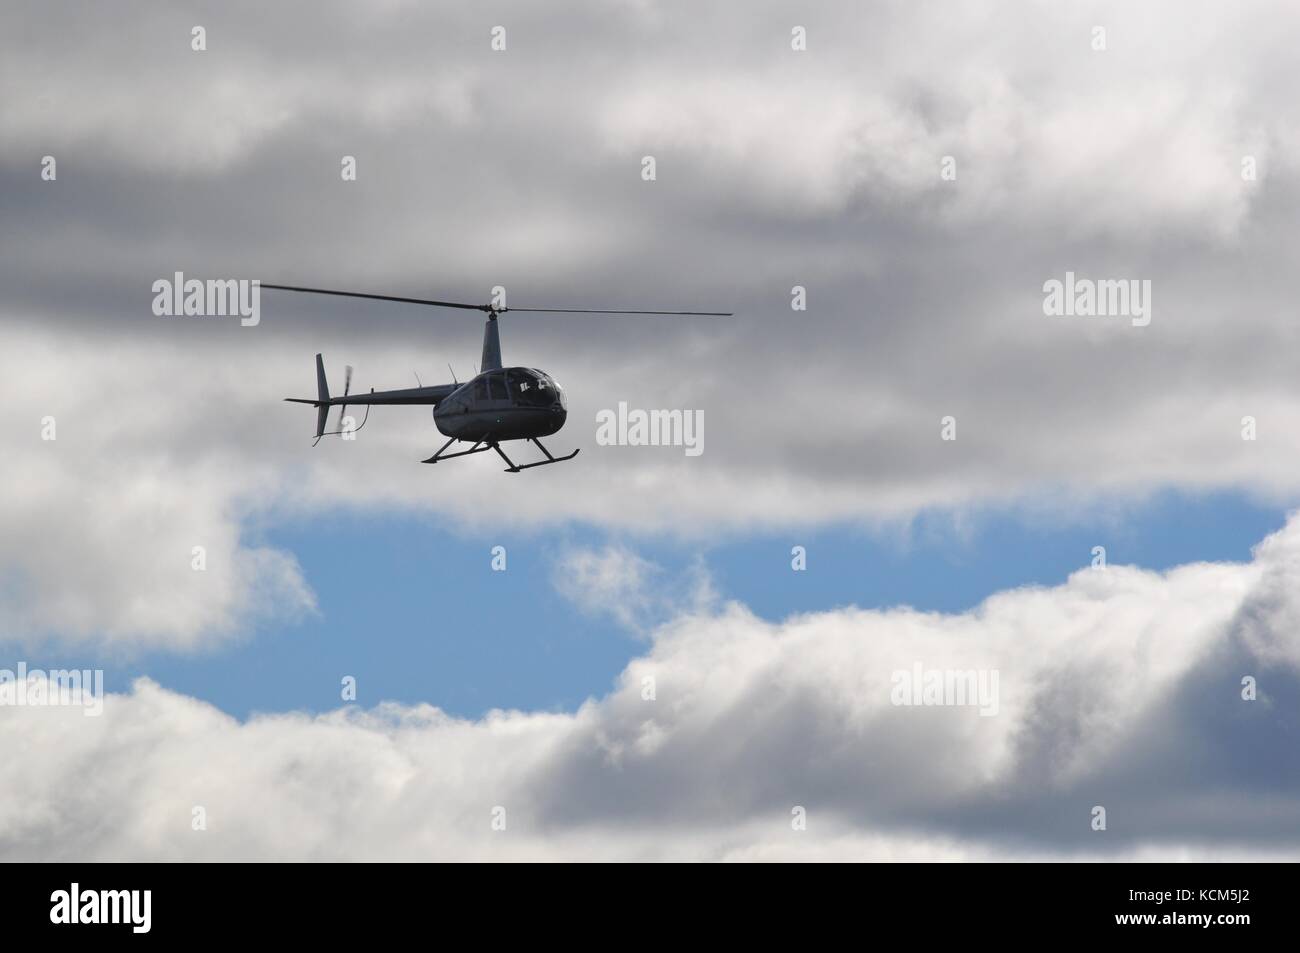 Flying helicopter Stock Photo